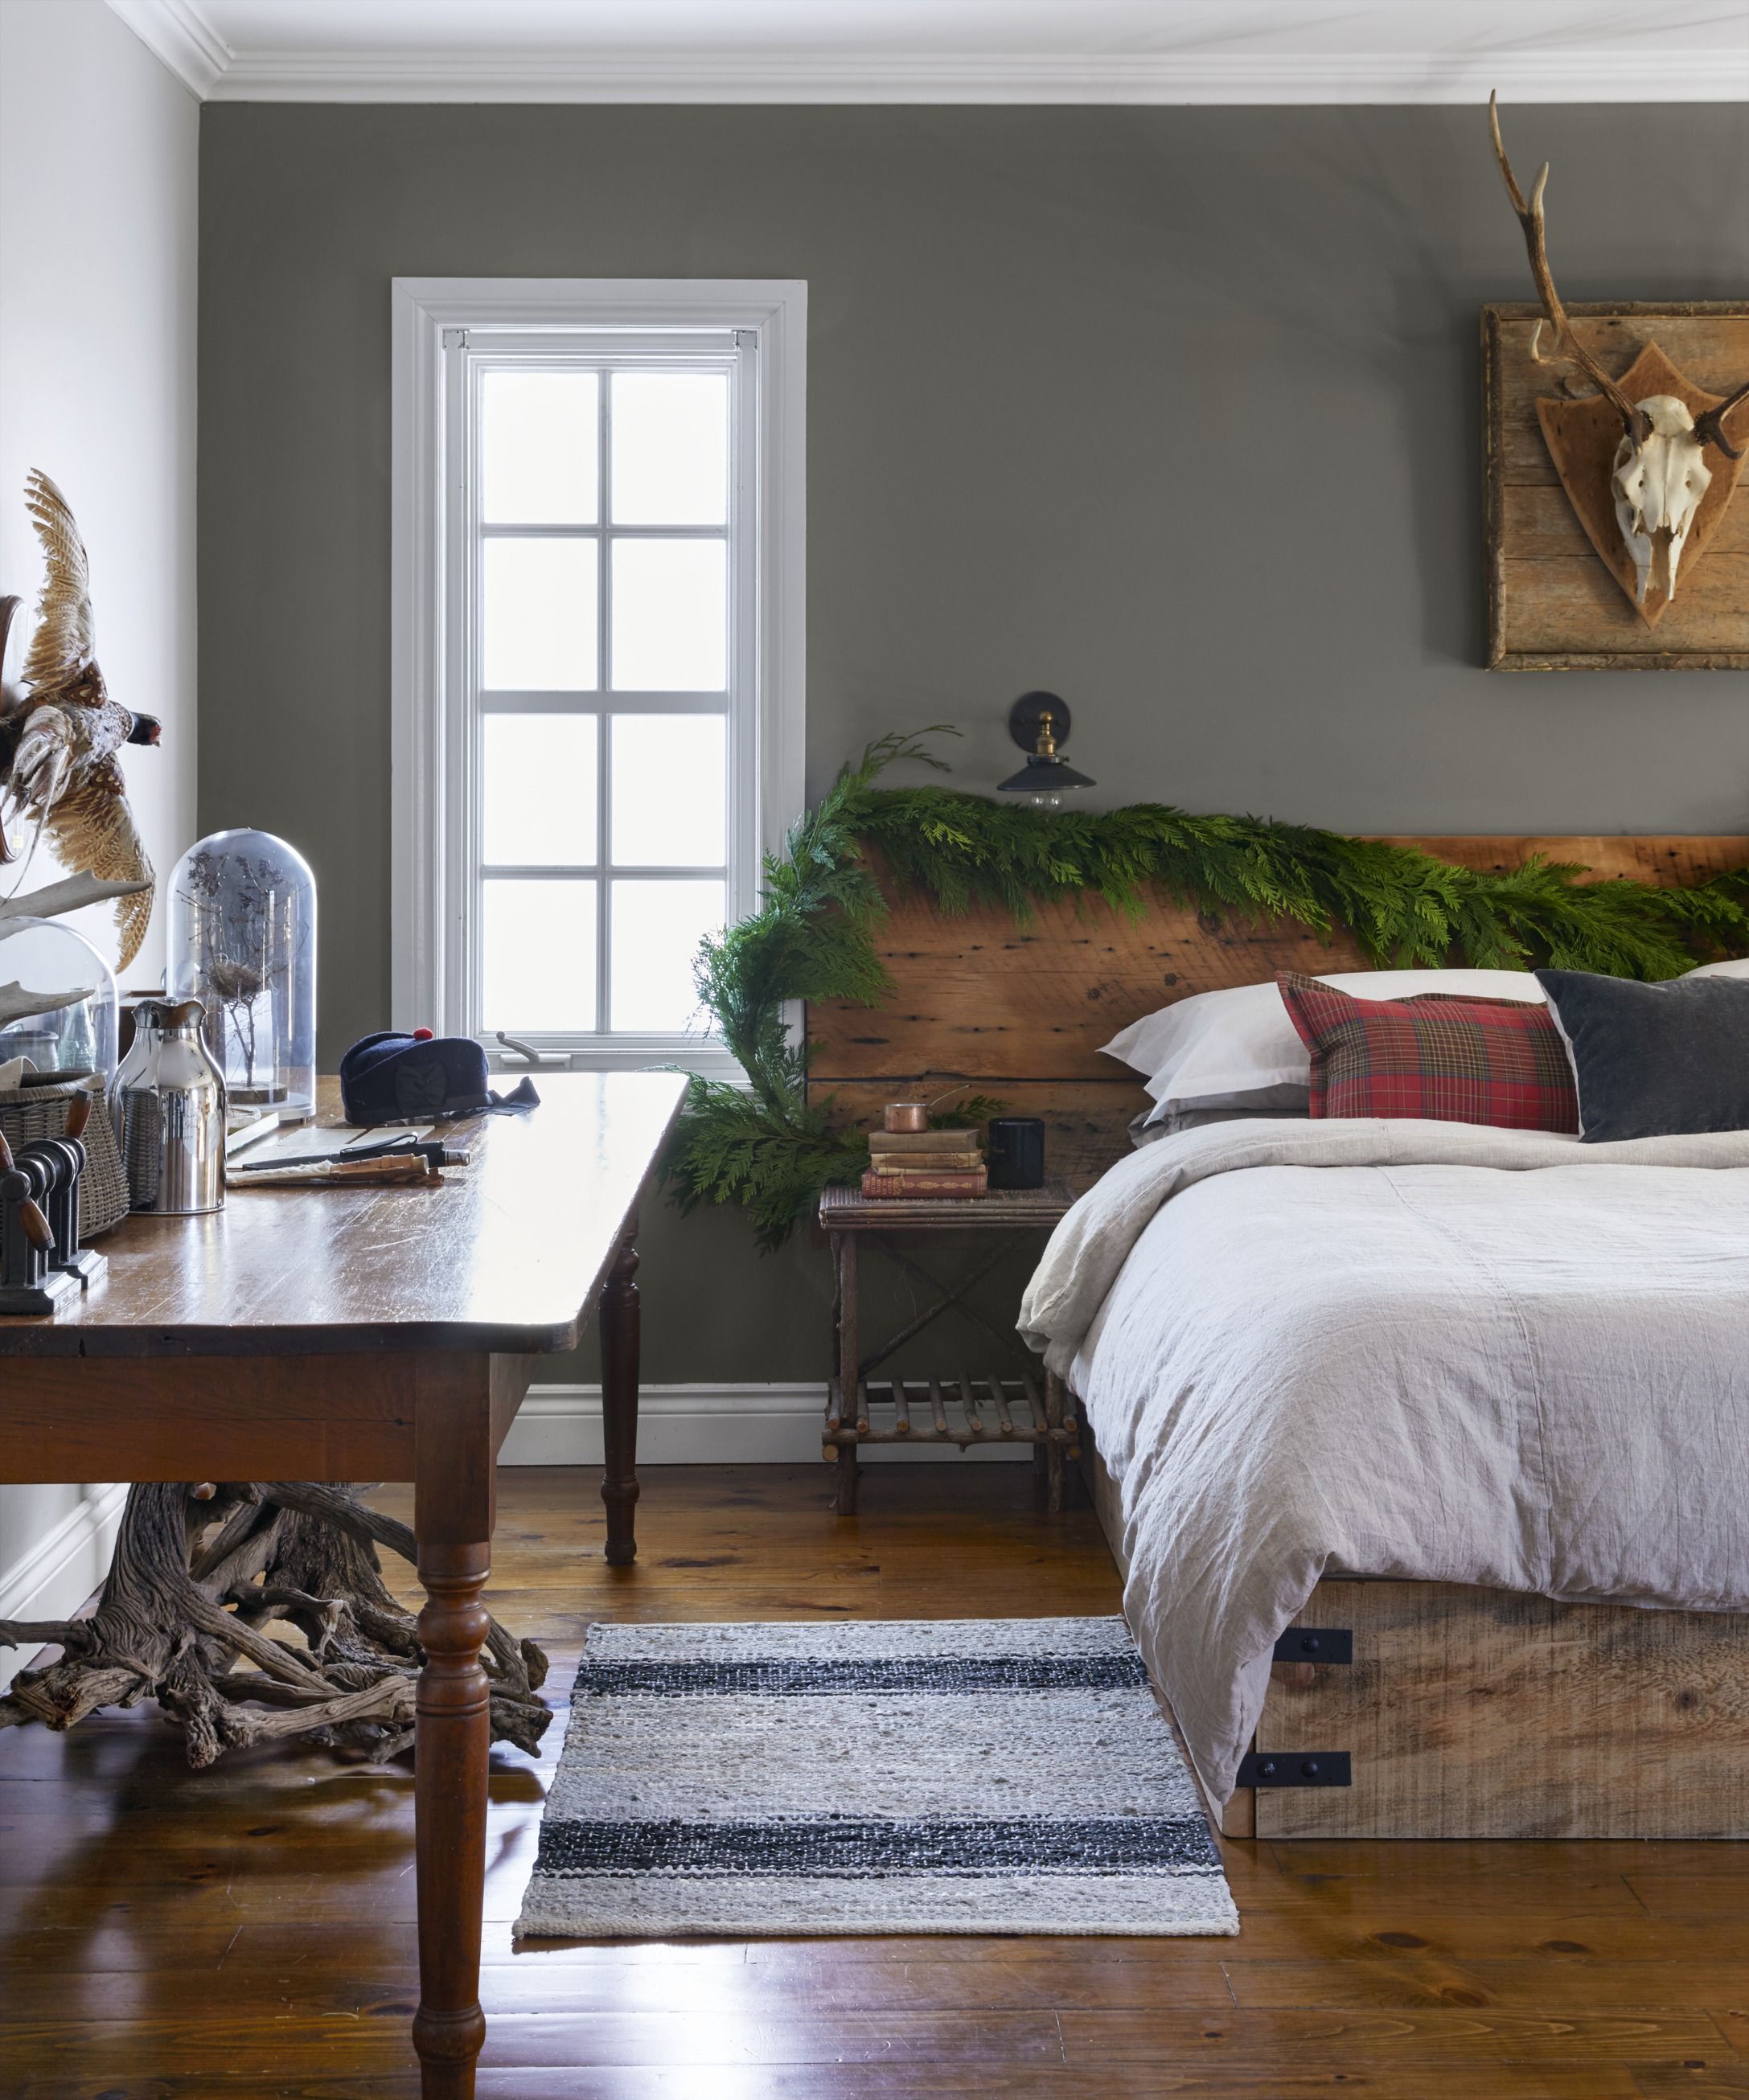 A Warm & Cozy Holiday Guest Room - American Farmhouse Style